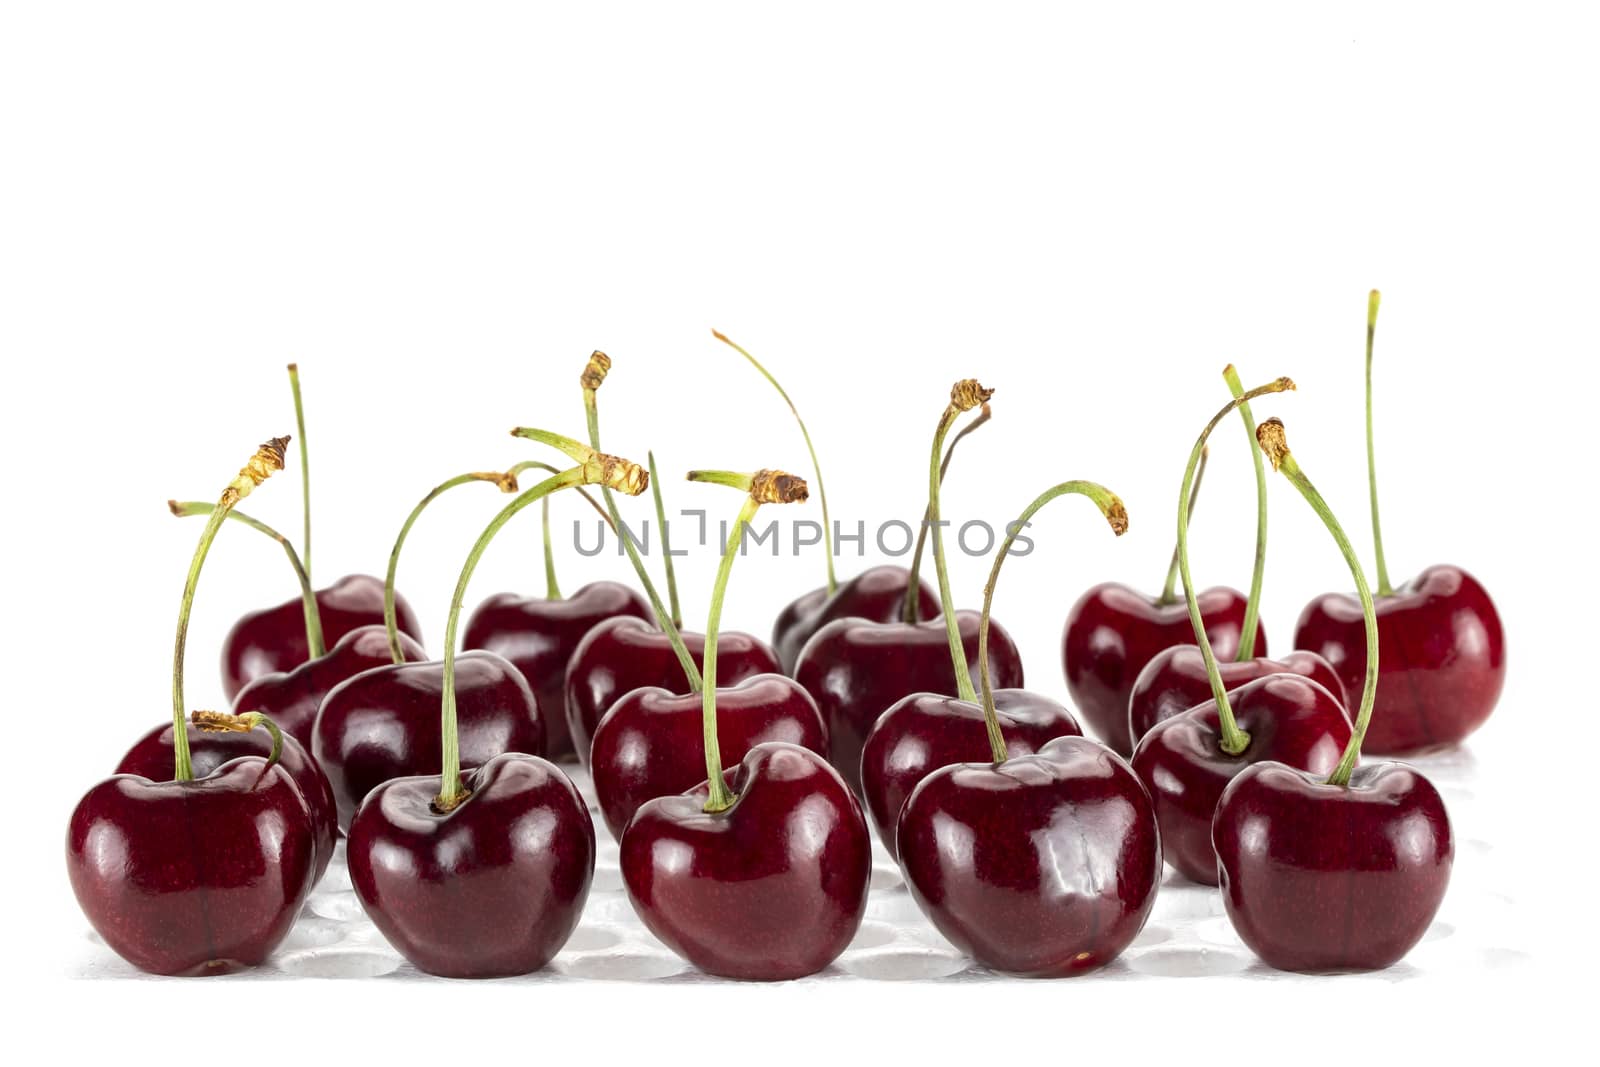 Rows and columns of fresh cherries. Isolated on white background.